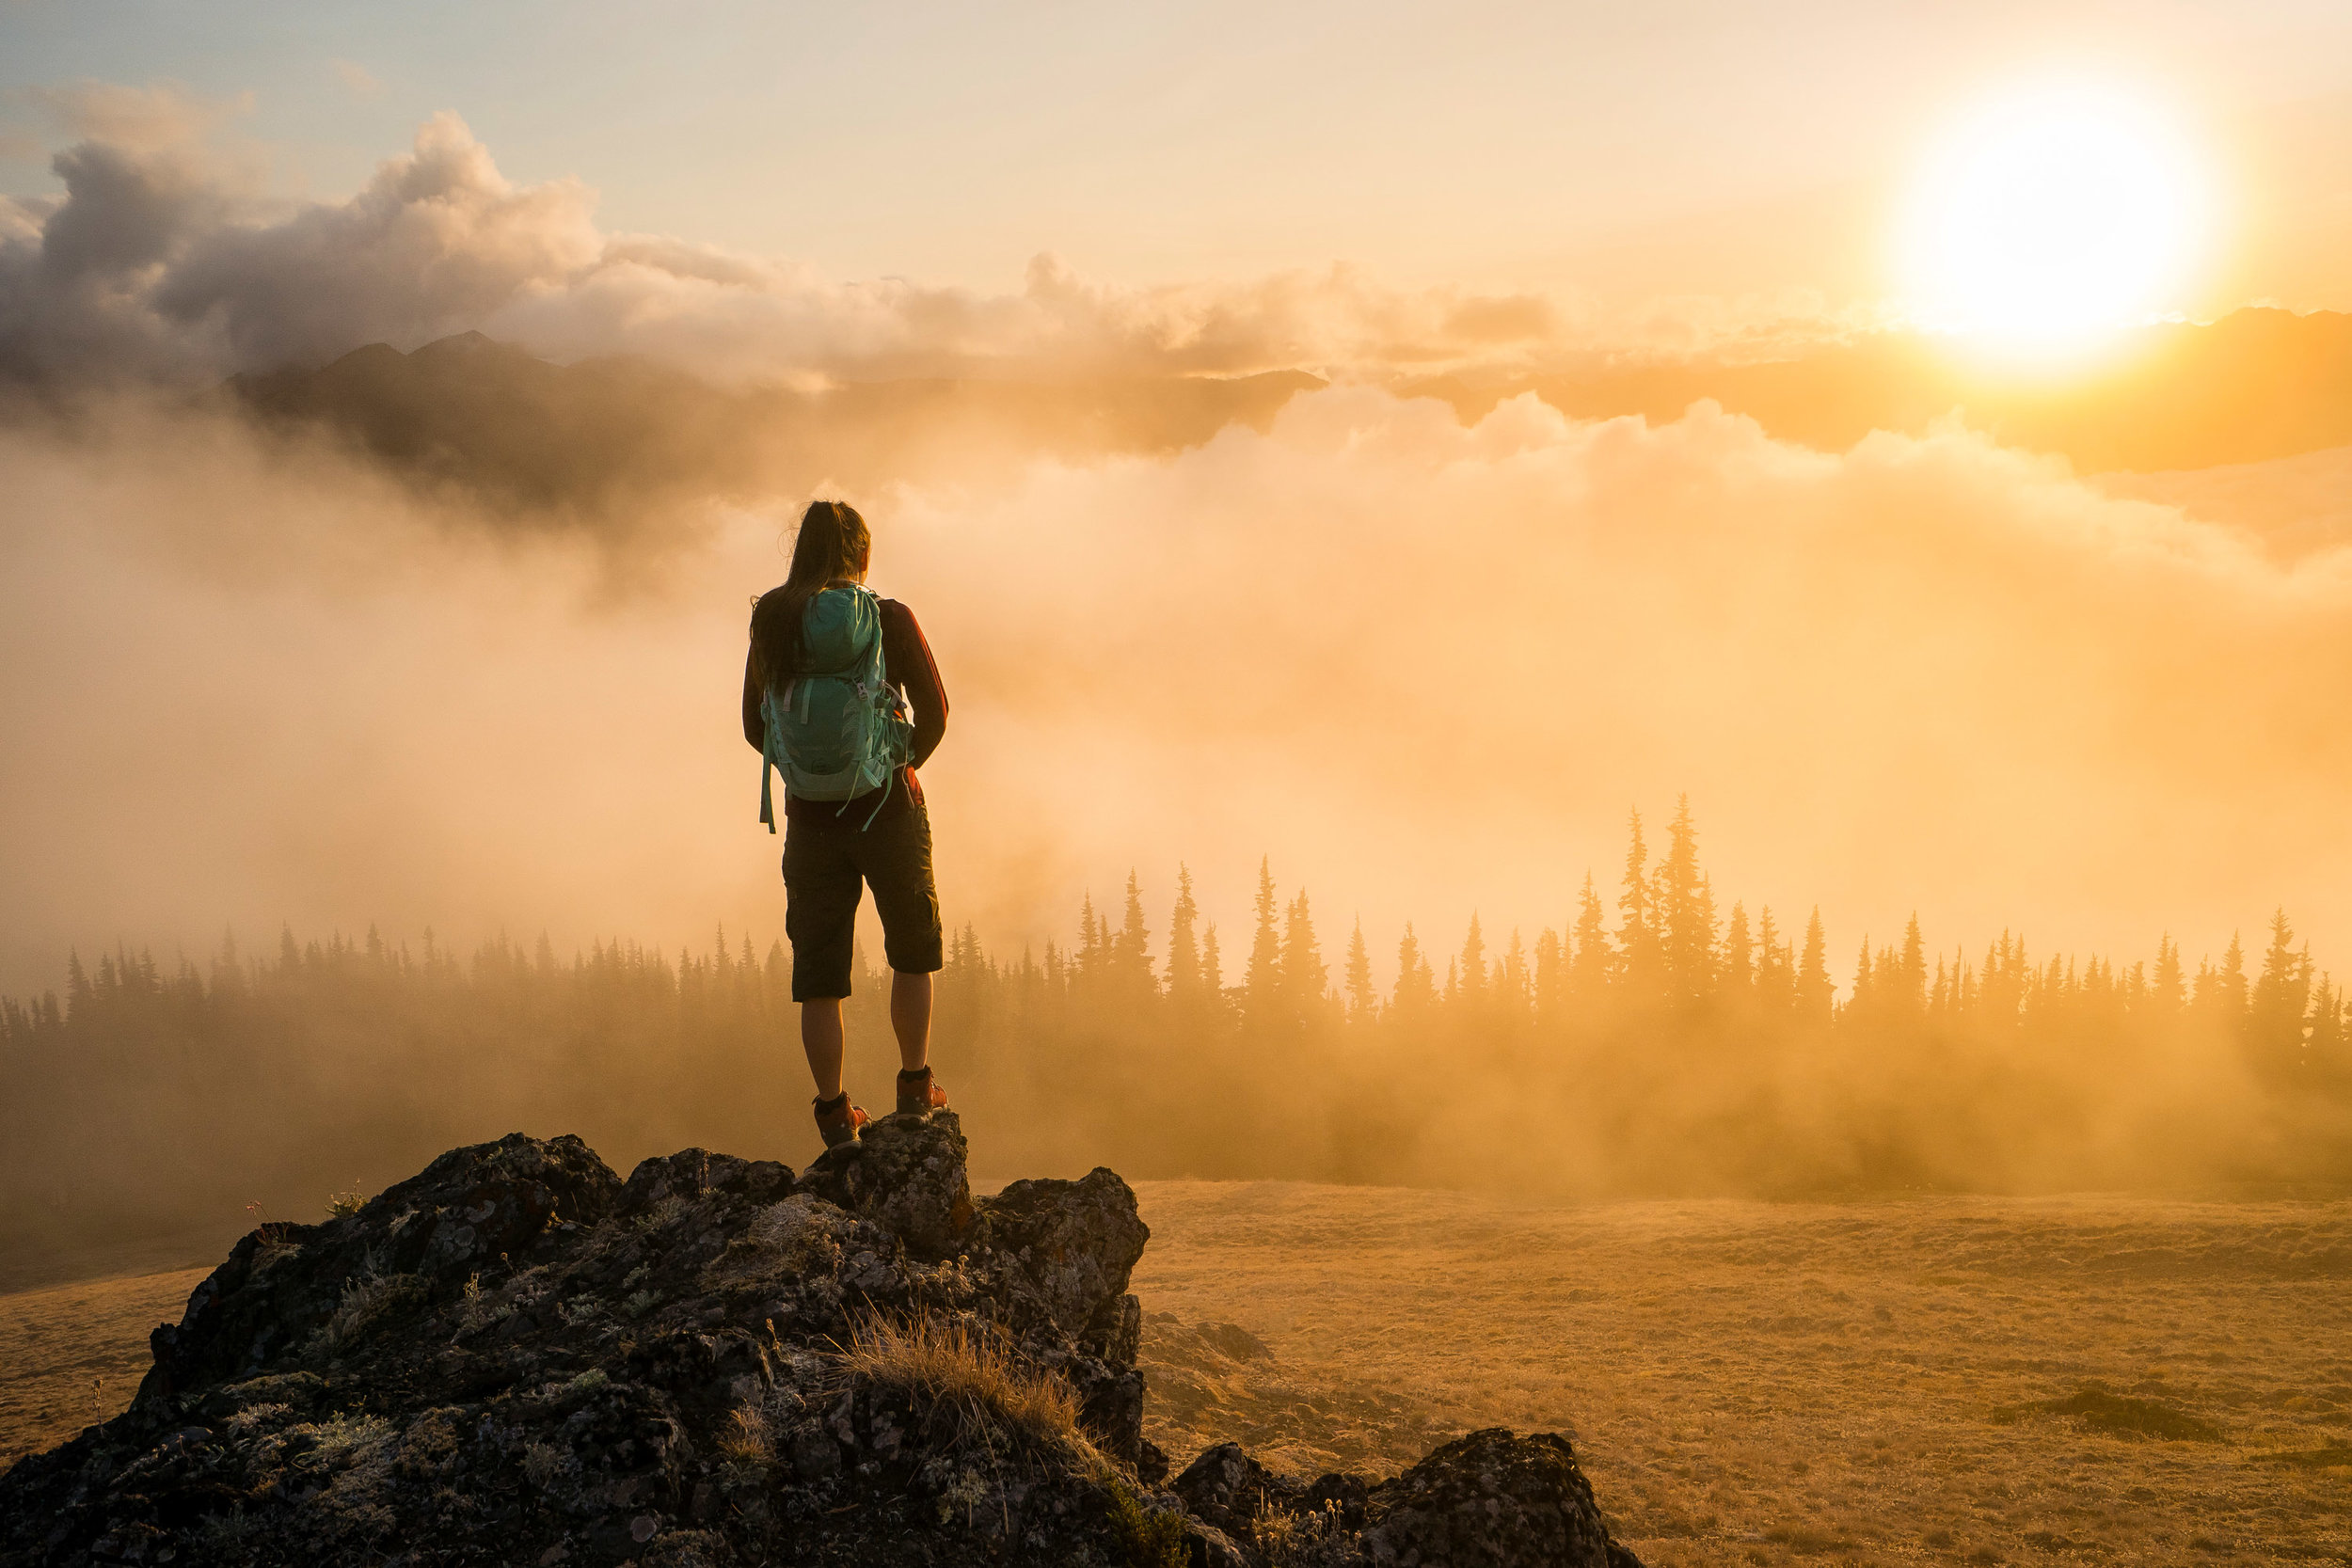  Adventure: Hiking in Olympic National Park in summertime, Olympic National Park, Washington 